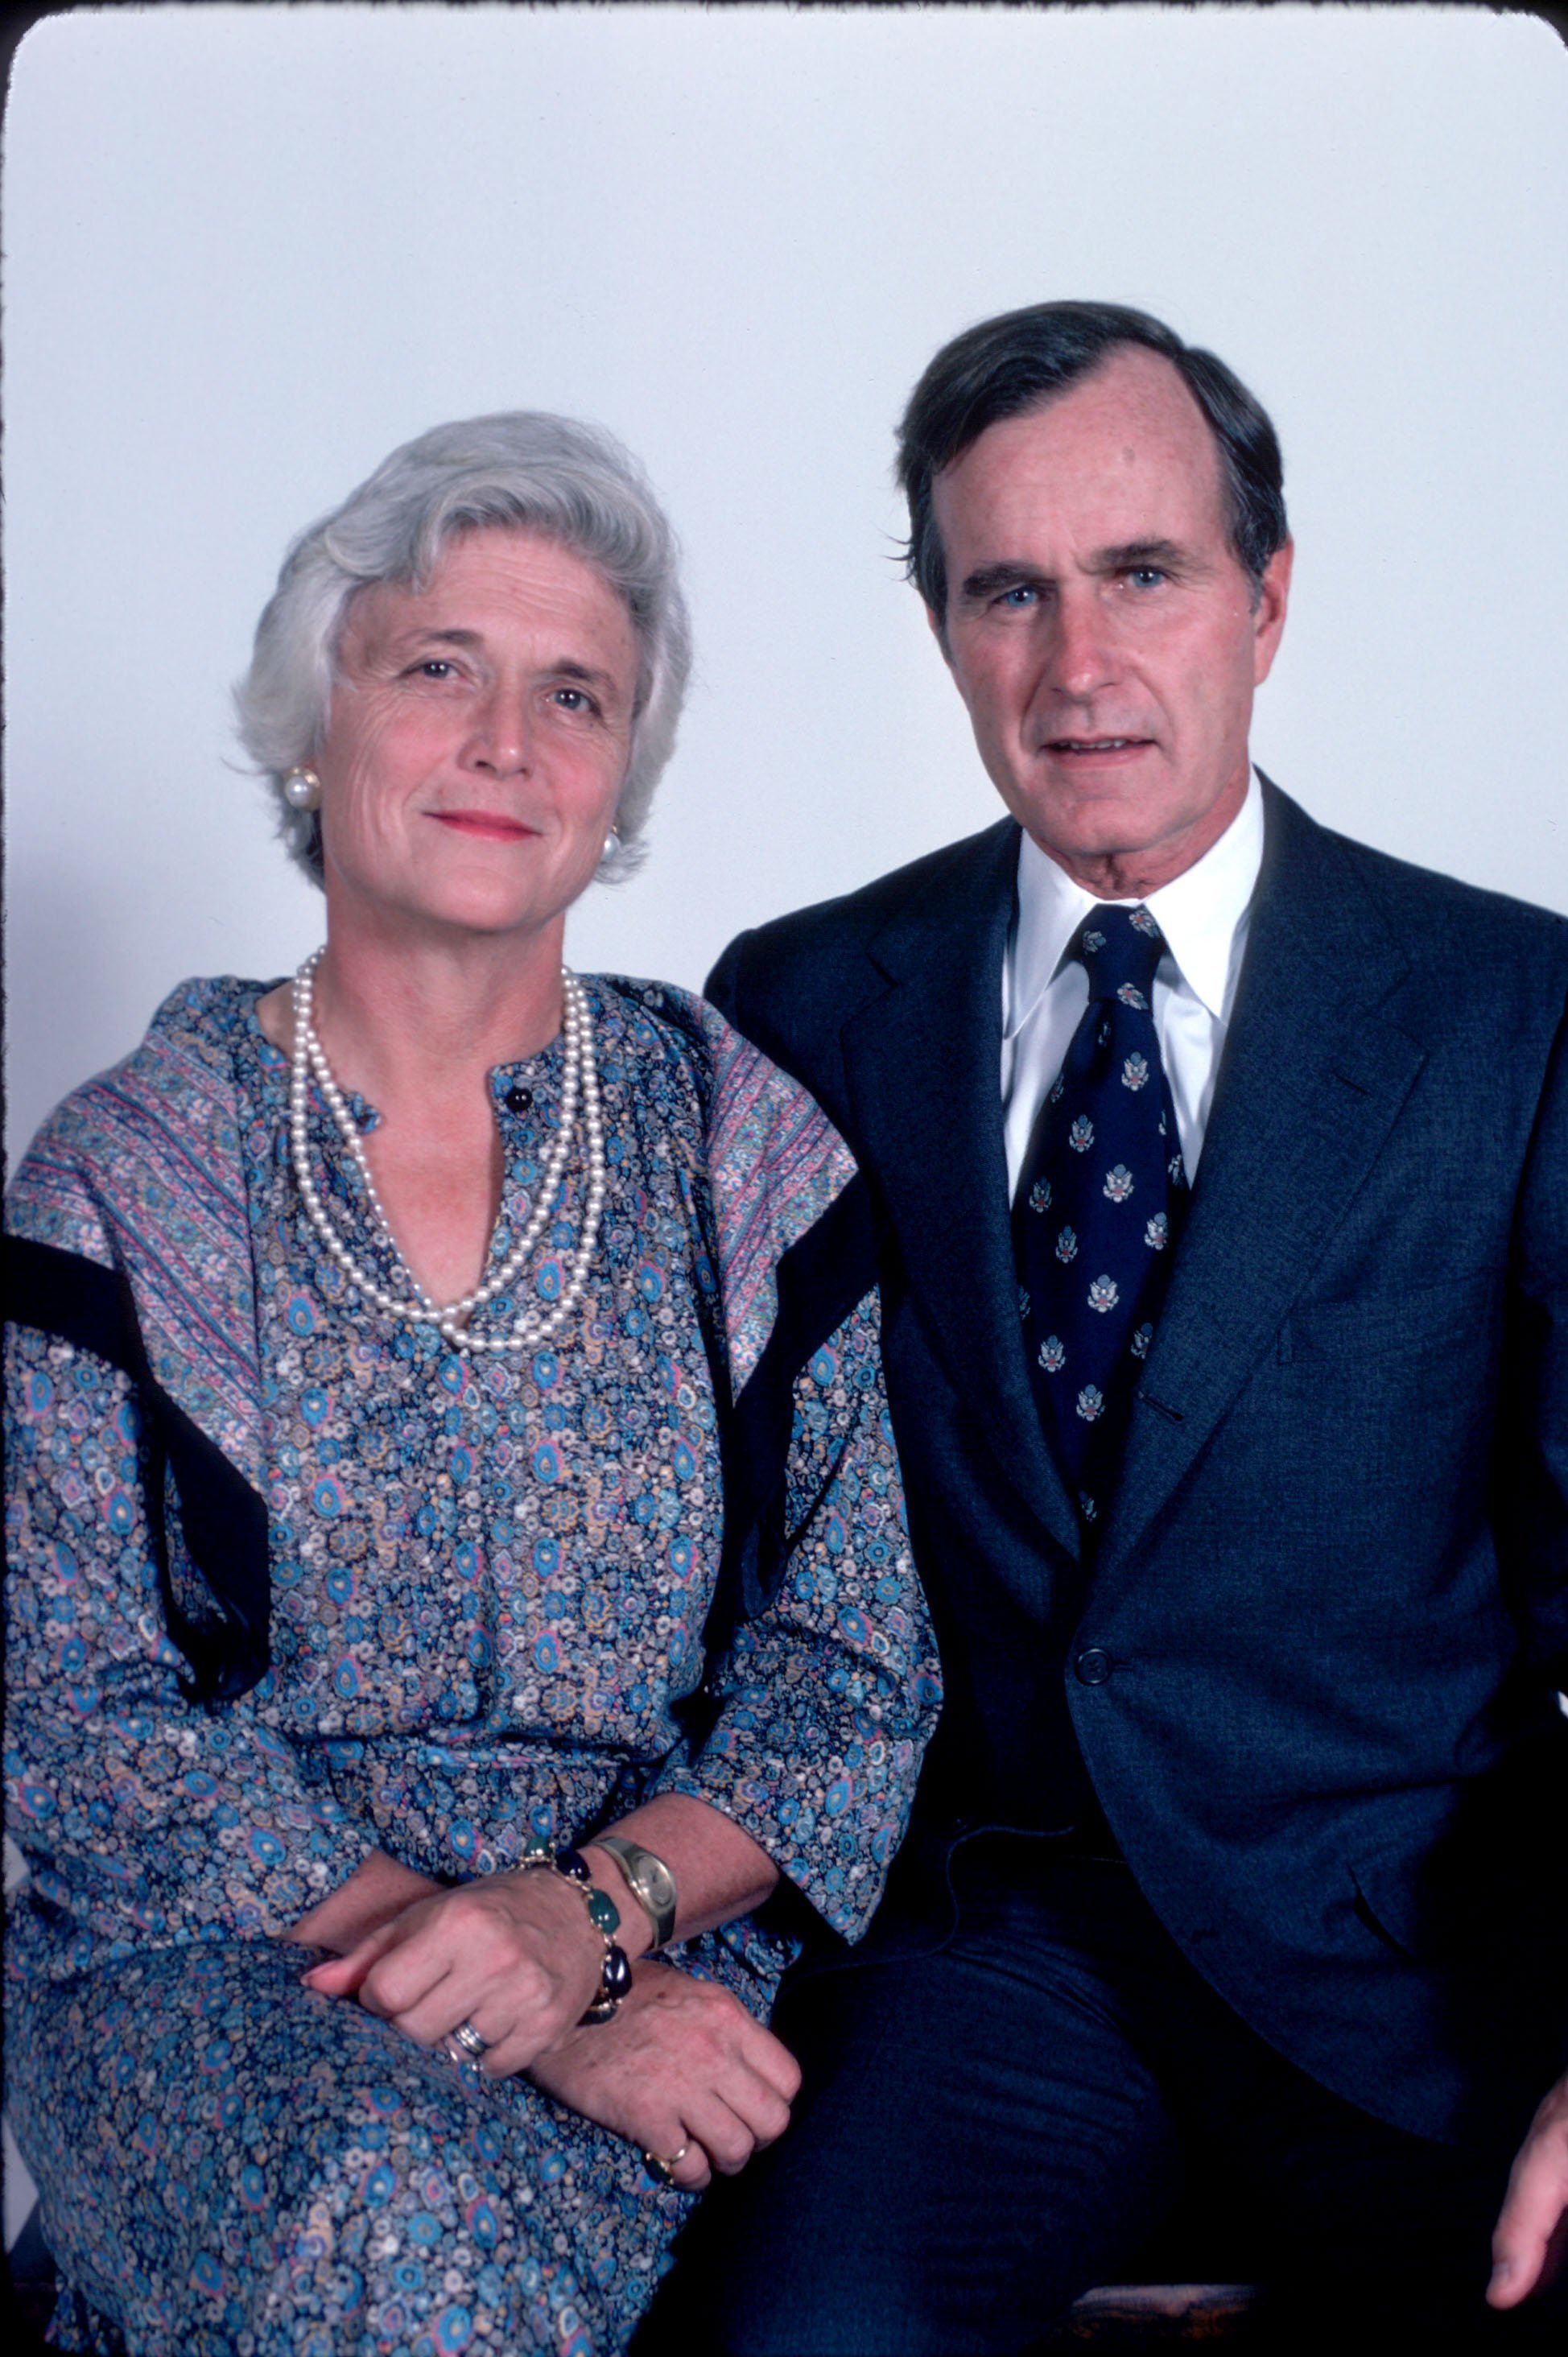 Barbara and George Bush. I Image: Getty Images.